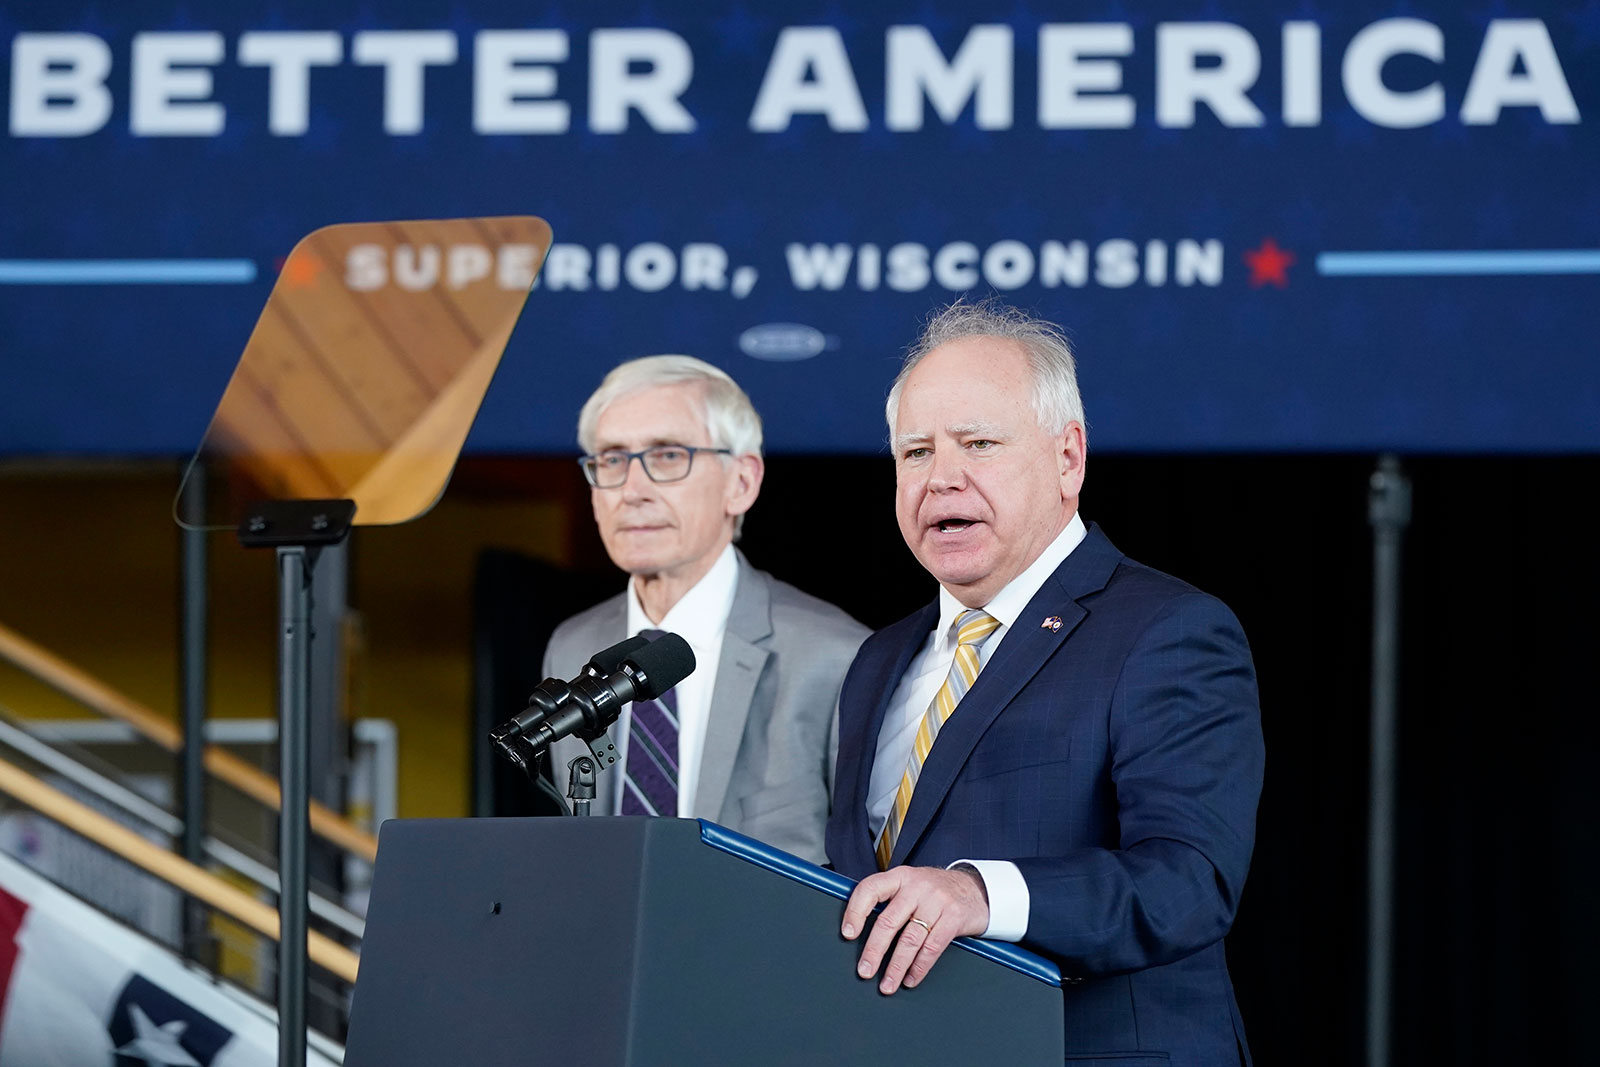 Minnesota Gov. Tim Walz speaks as Wisconsin Gov. Tony Evers listens during an event to promote President Joe Biden's infrastructure agenda at the University of Wisconsin-Superior on March 2. 